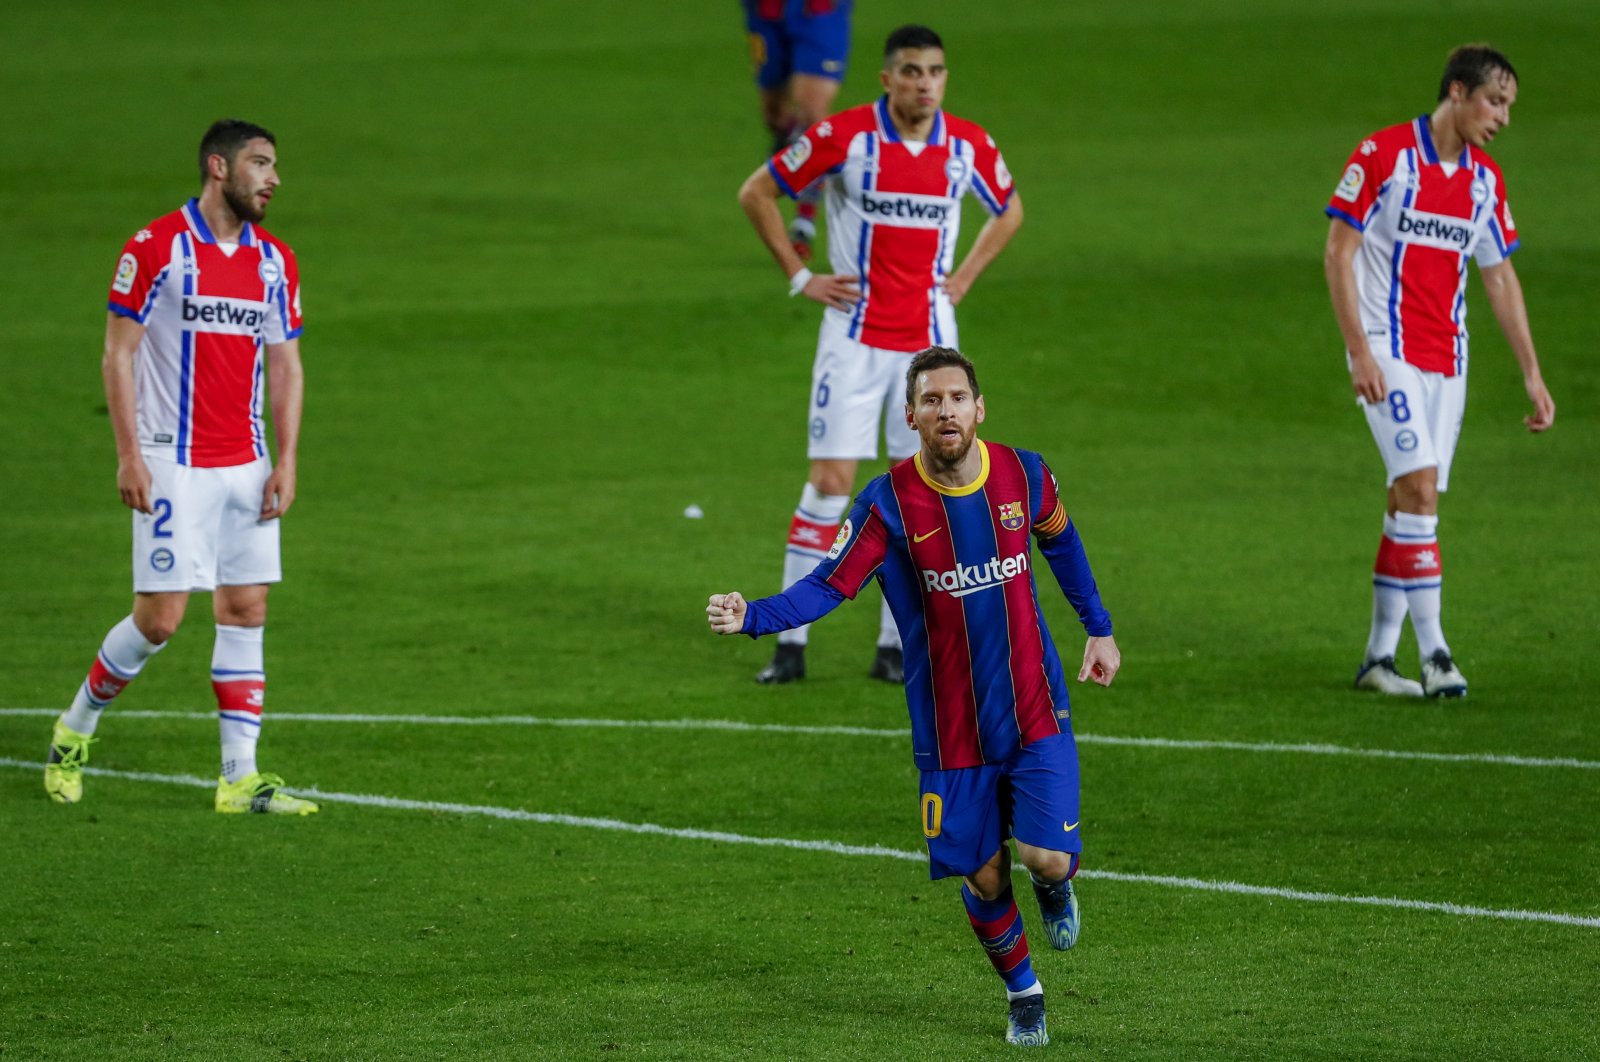 Barcelona's Lionel Messi celebrates scoring his side's second goal against Alaves at the Camp Nou, Barcelona, Spain, Feb. 13, 2021. (AP Photo)